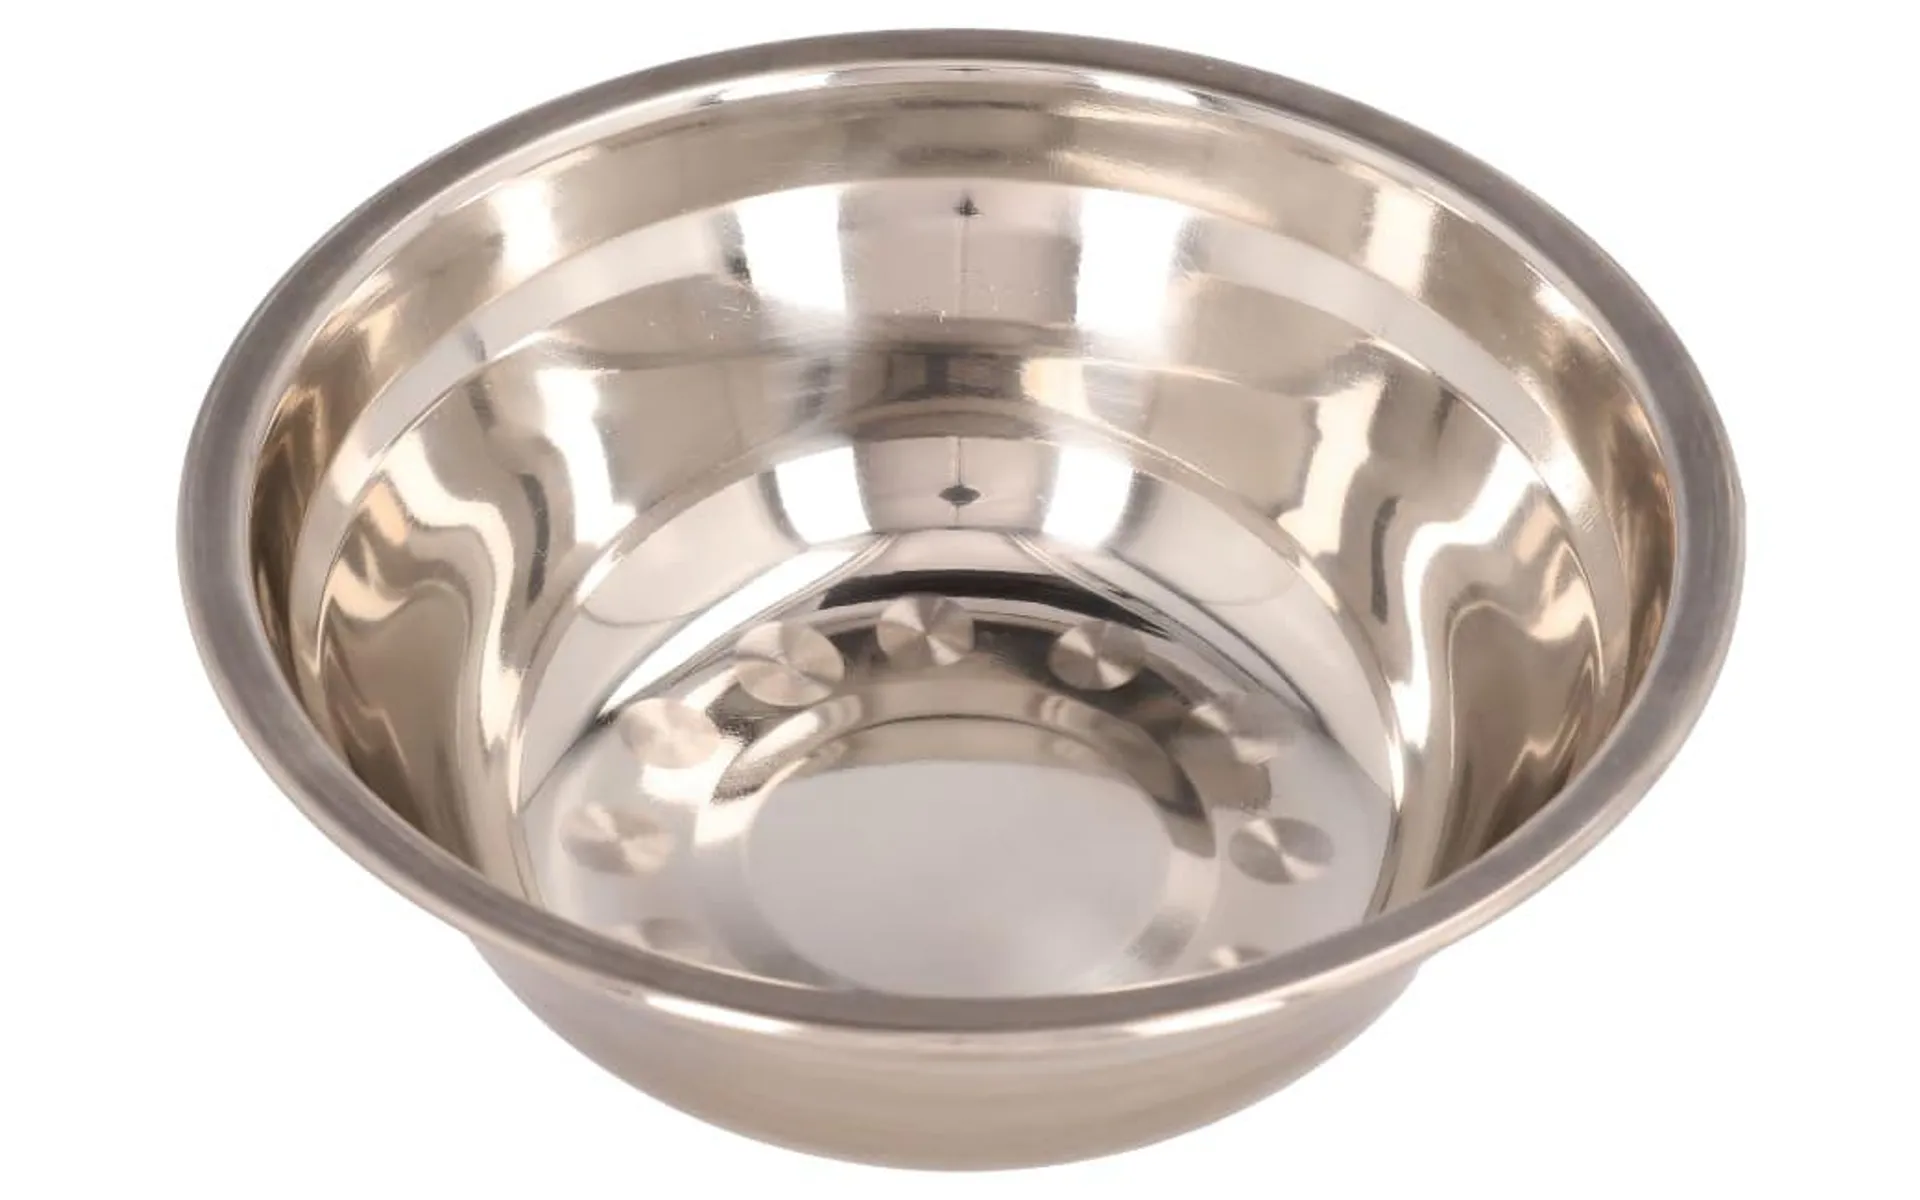 Bass Pro Shops Stainless Steel Bowl